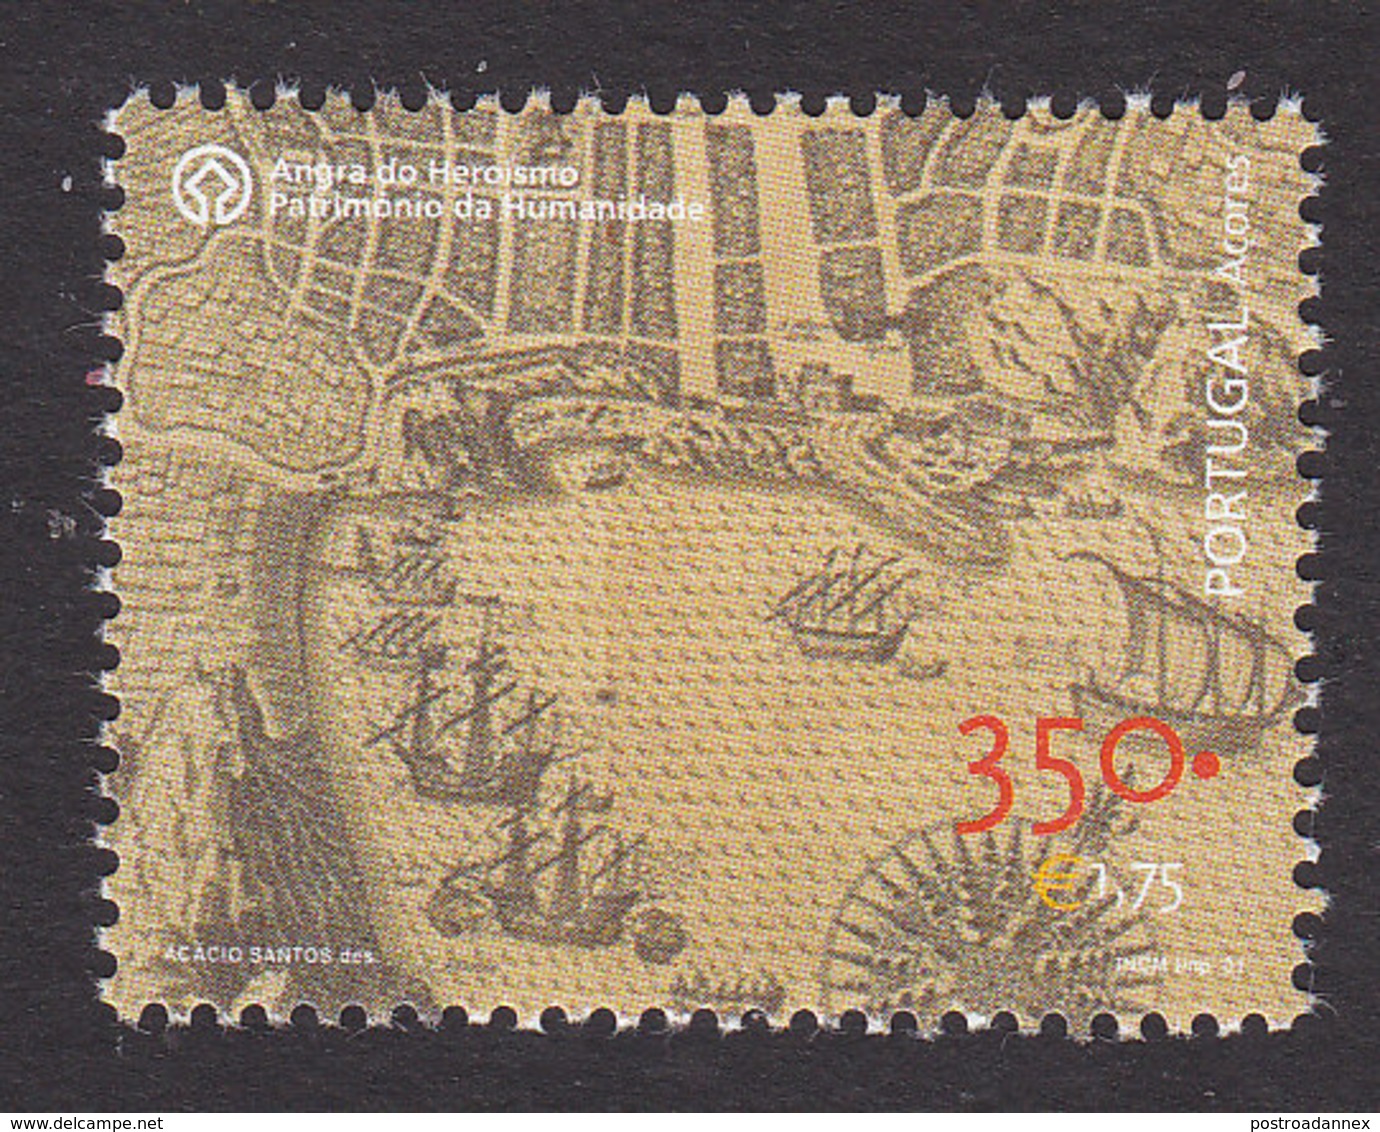 Azores, Scott #462 Single From Souvenir Sheet, Mint Never Hinged, Map, Issued 2001 - Azoren